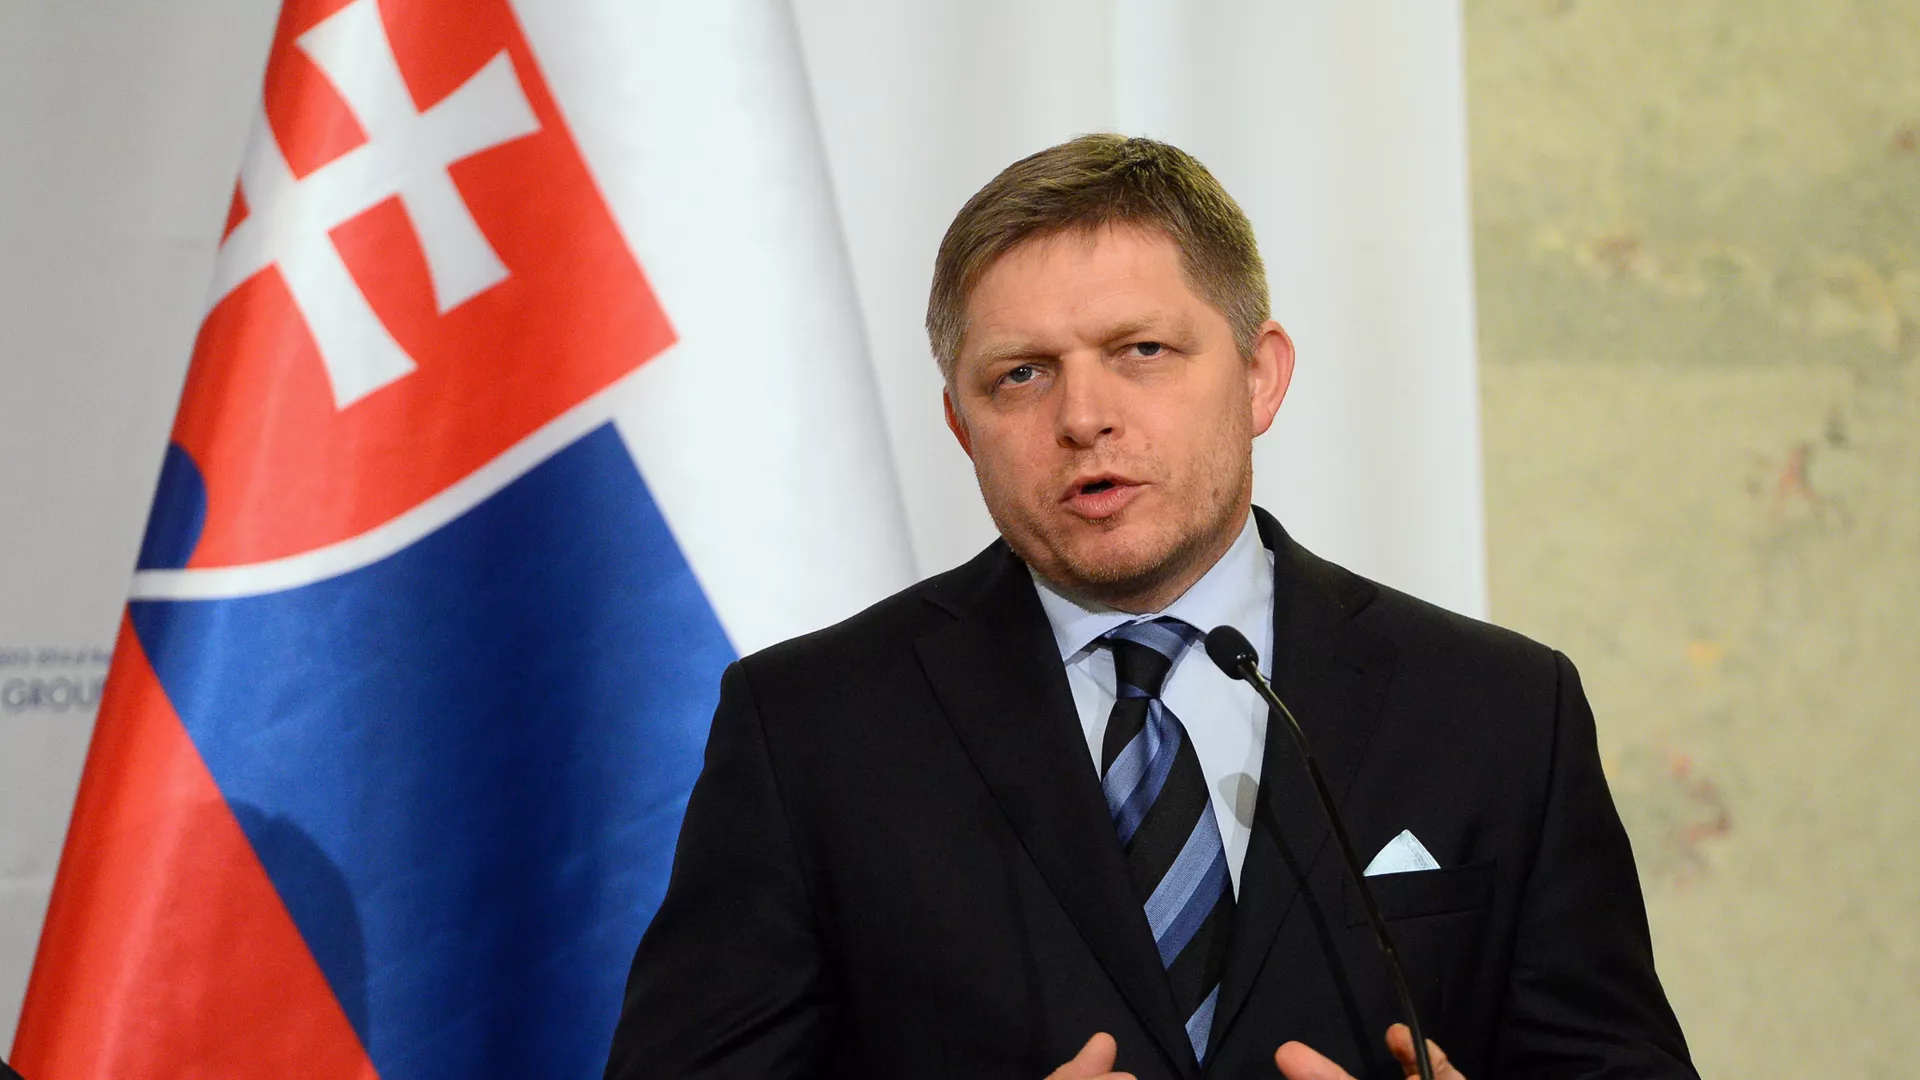 New Slovakian Government Will Likely Seek Closer Relations With Russia - Analyst